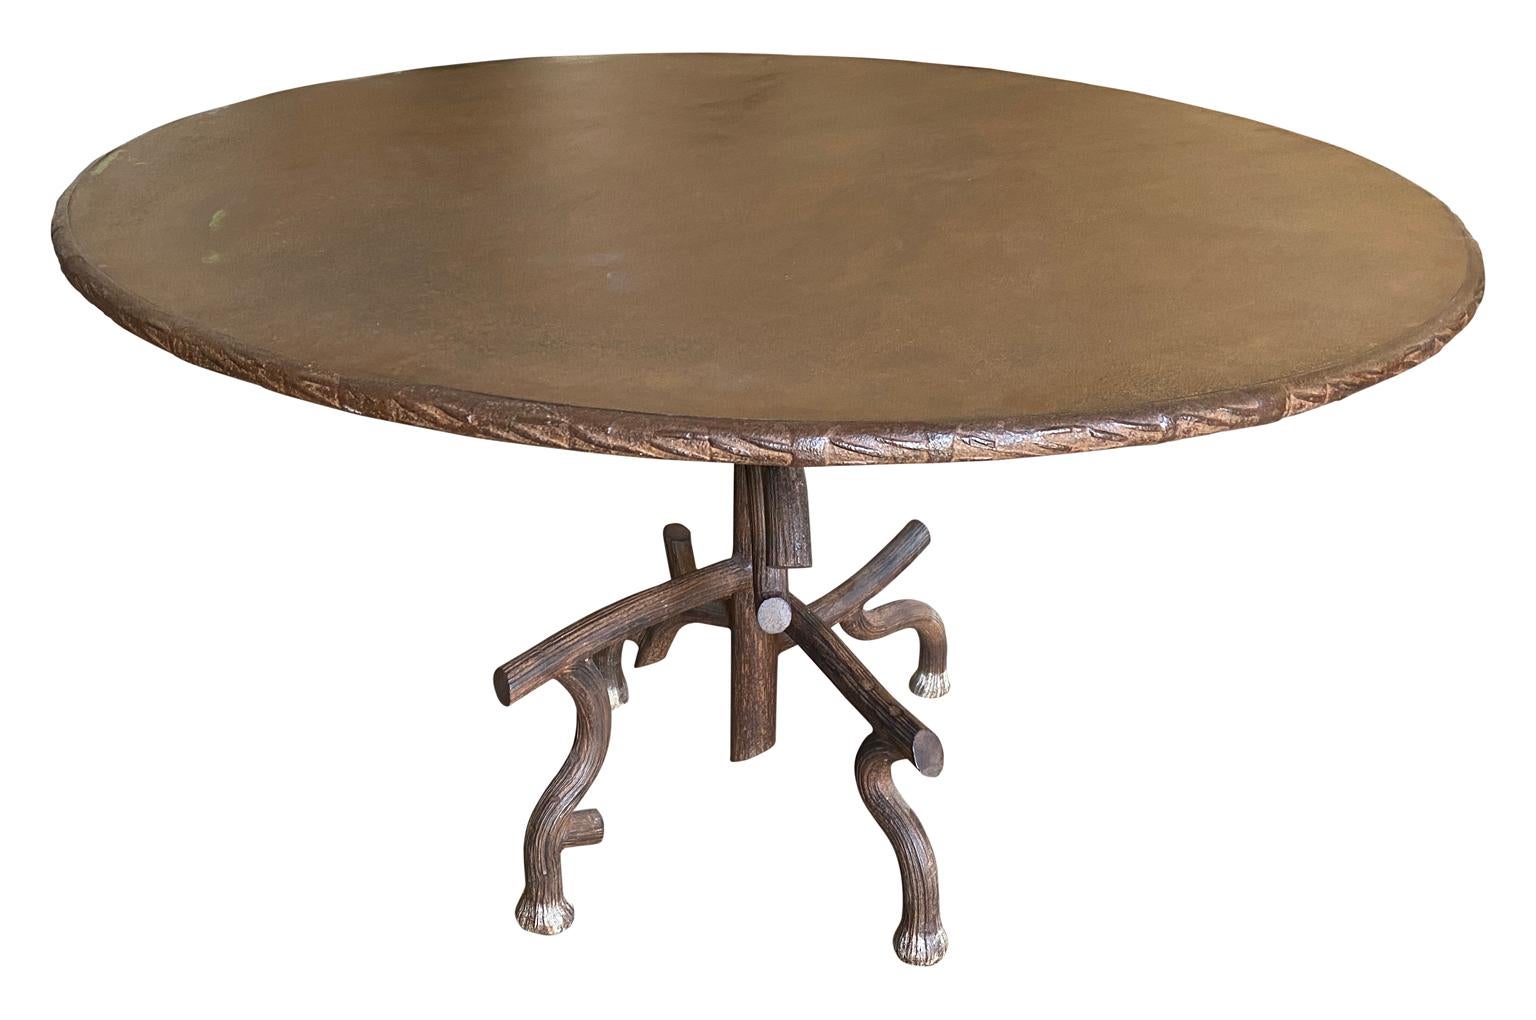 Pair of French Iron Faux Bois Garden Dining Tables In Good Condition For Sale In Atlanta, GA